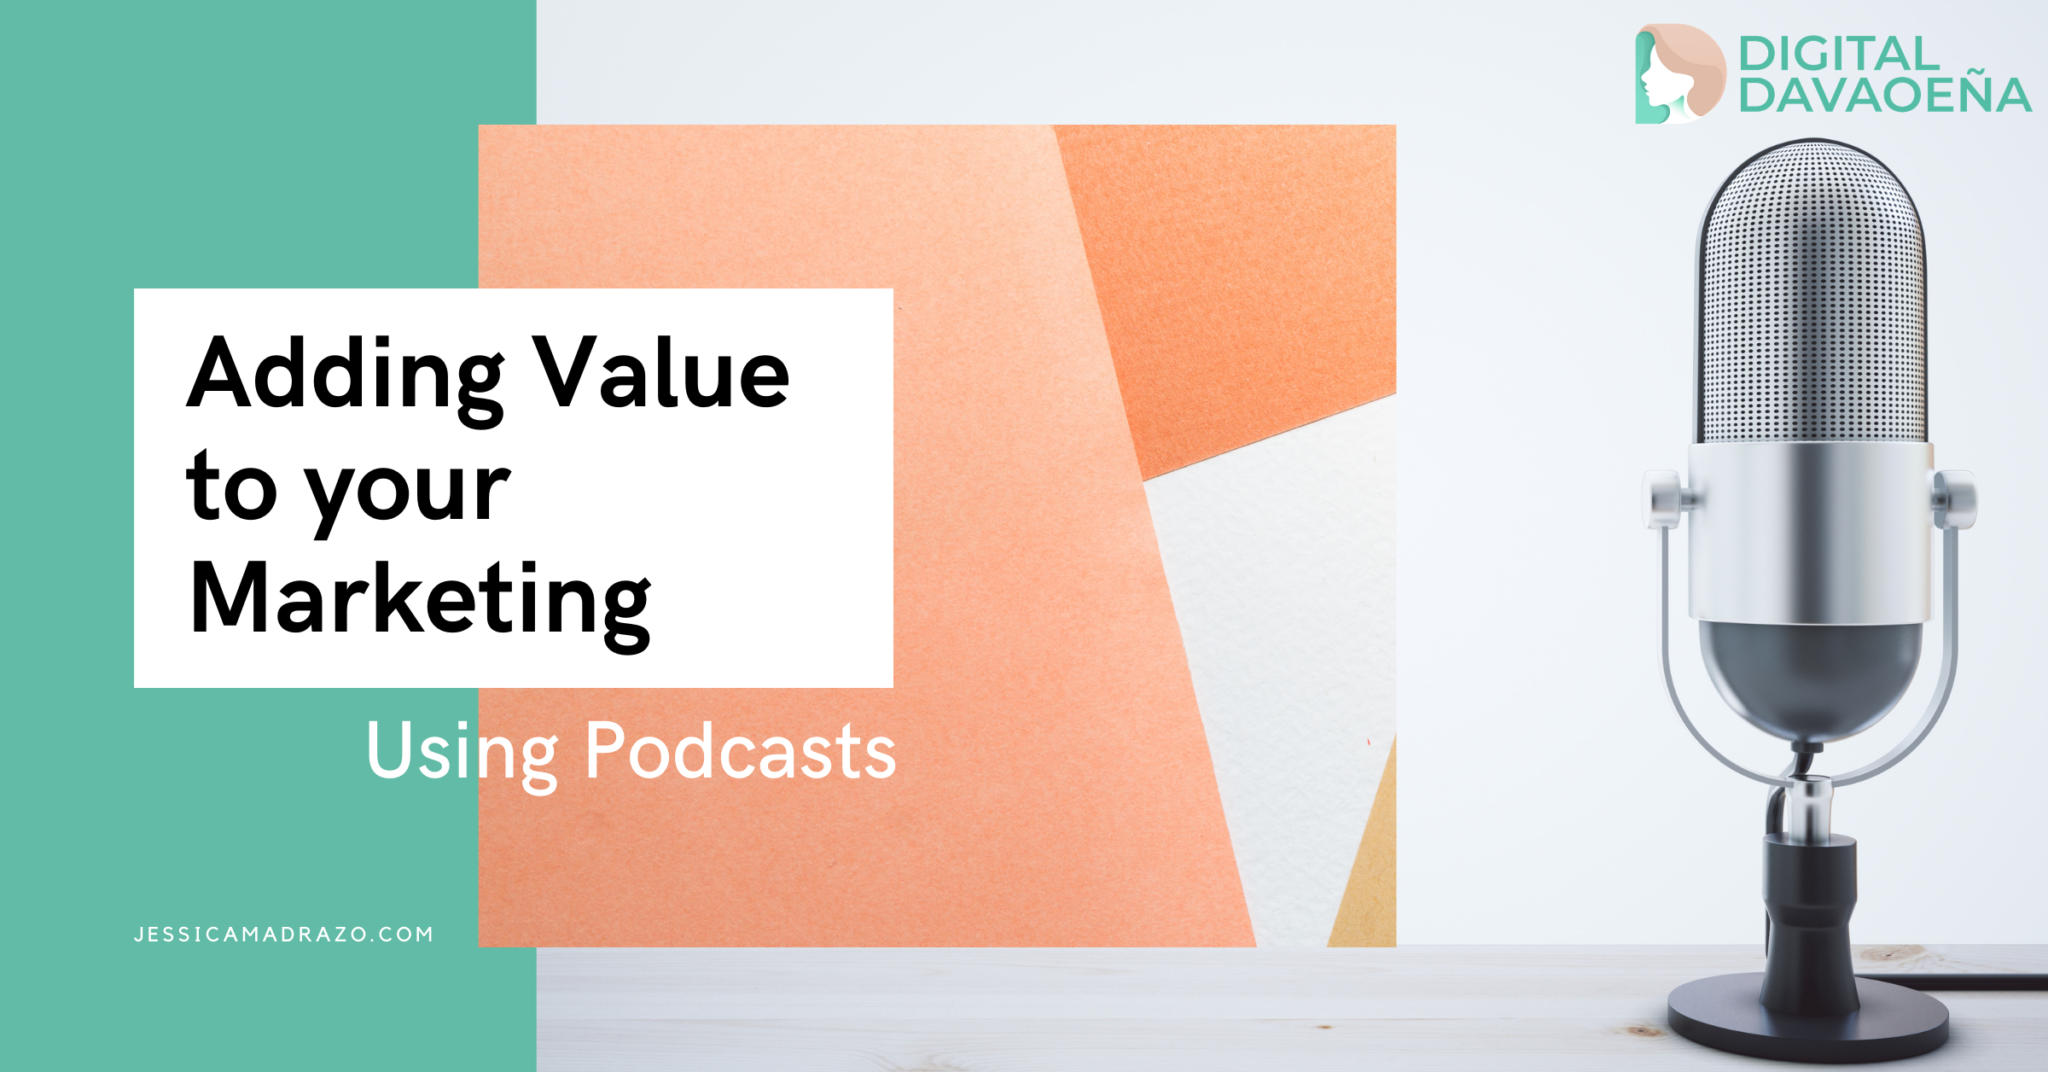 How Podcasts Can Add Value to Your Marketing